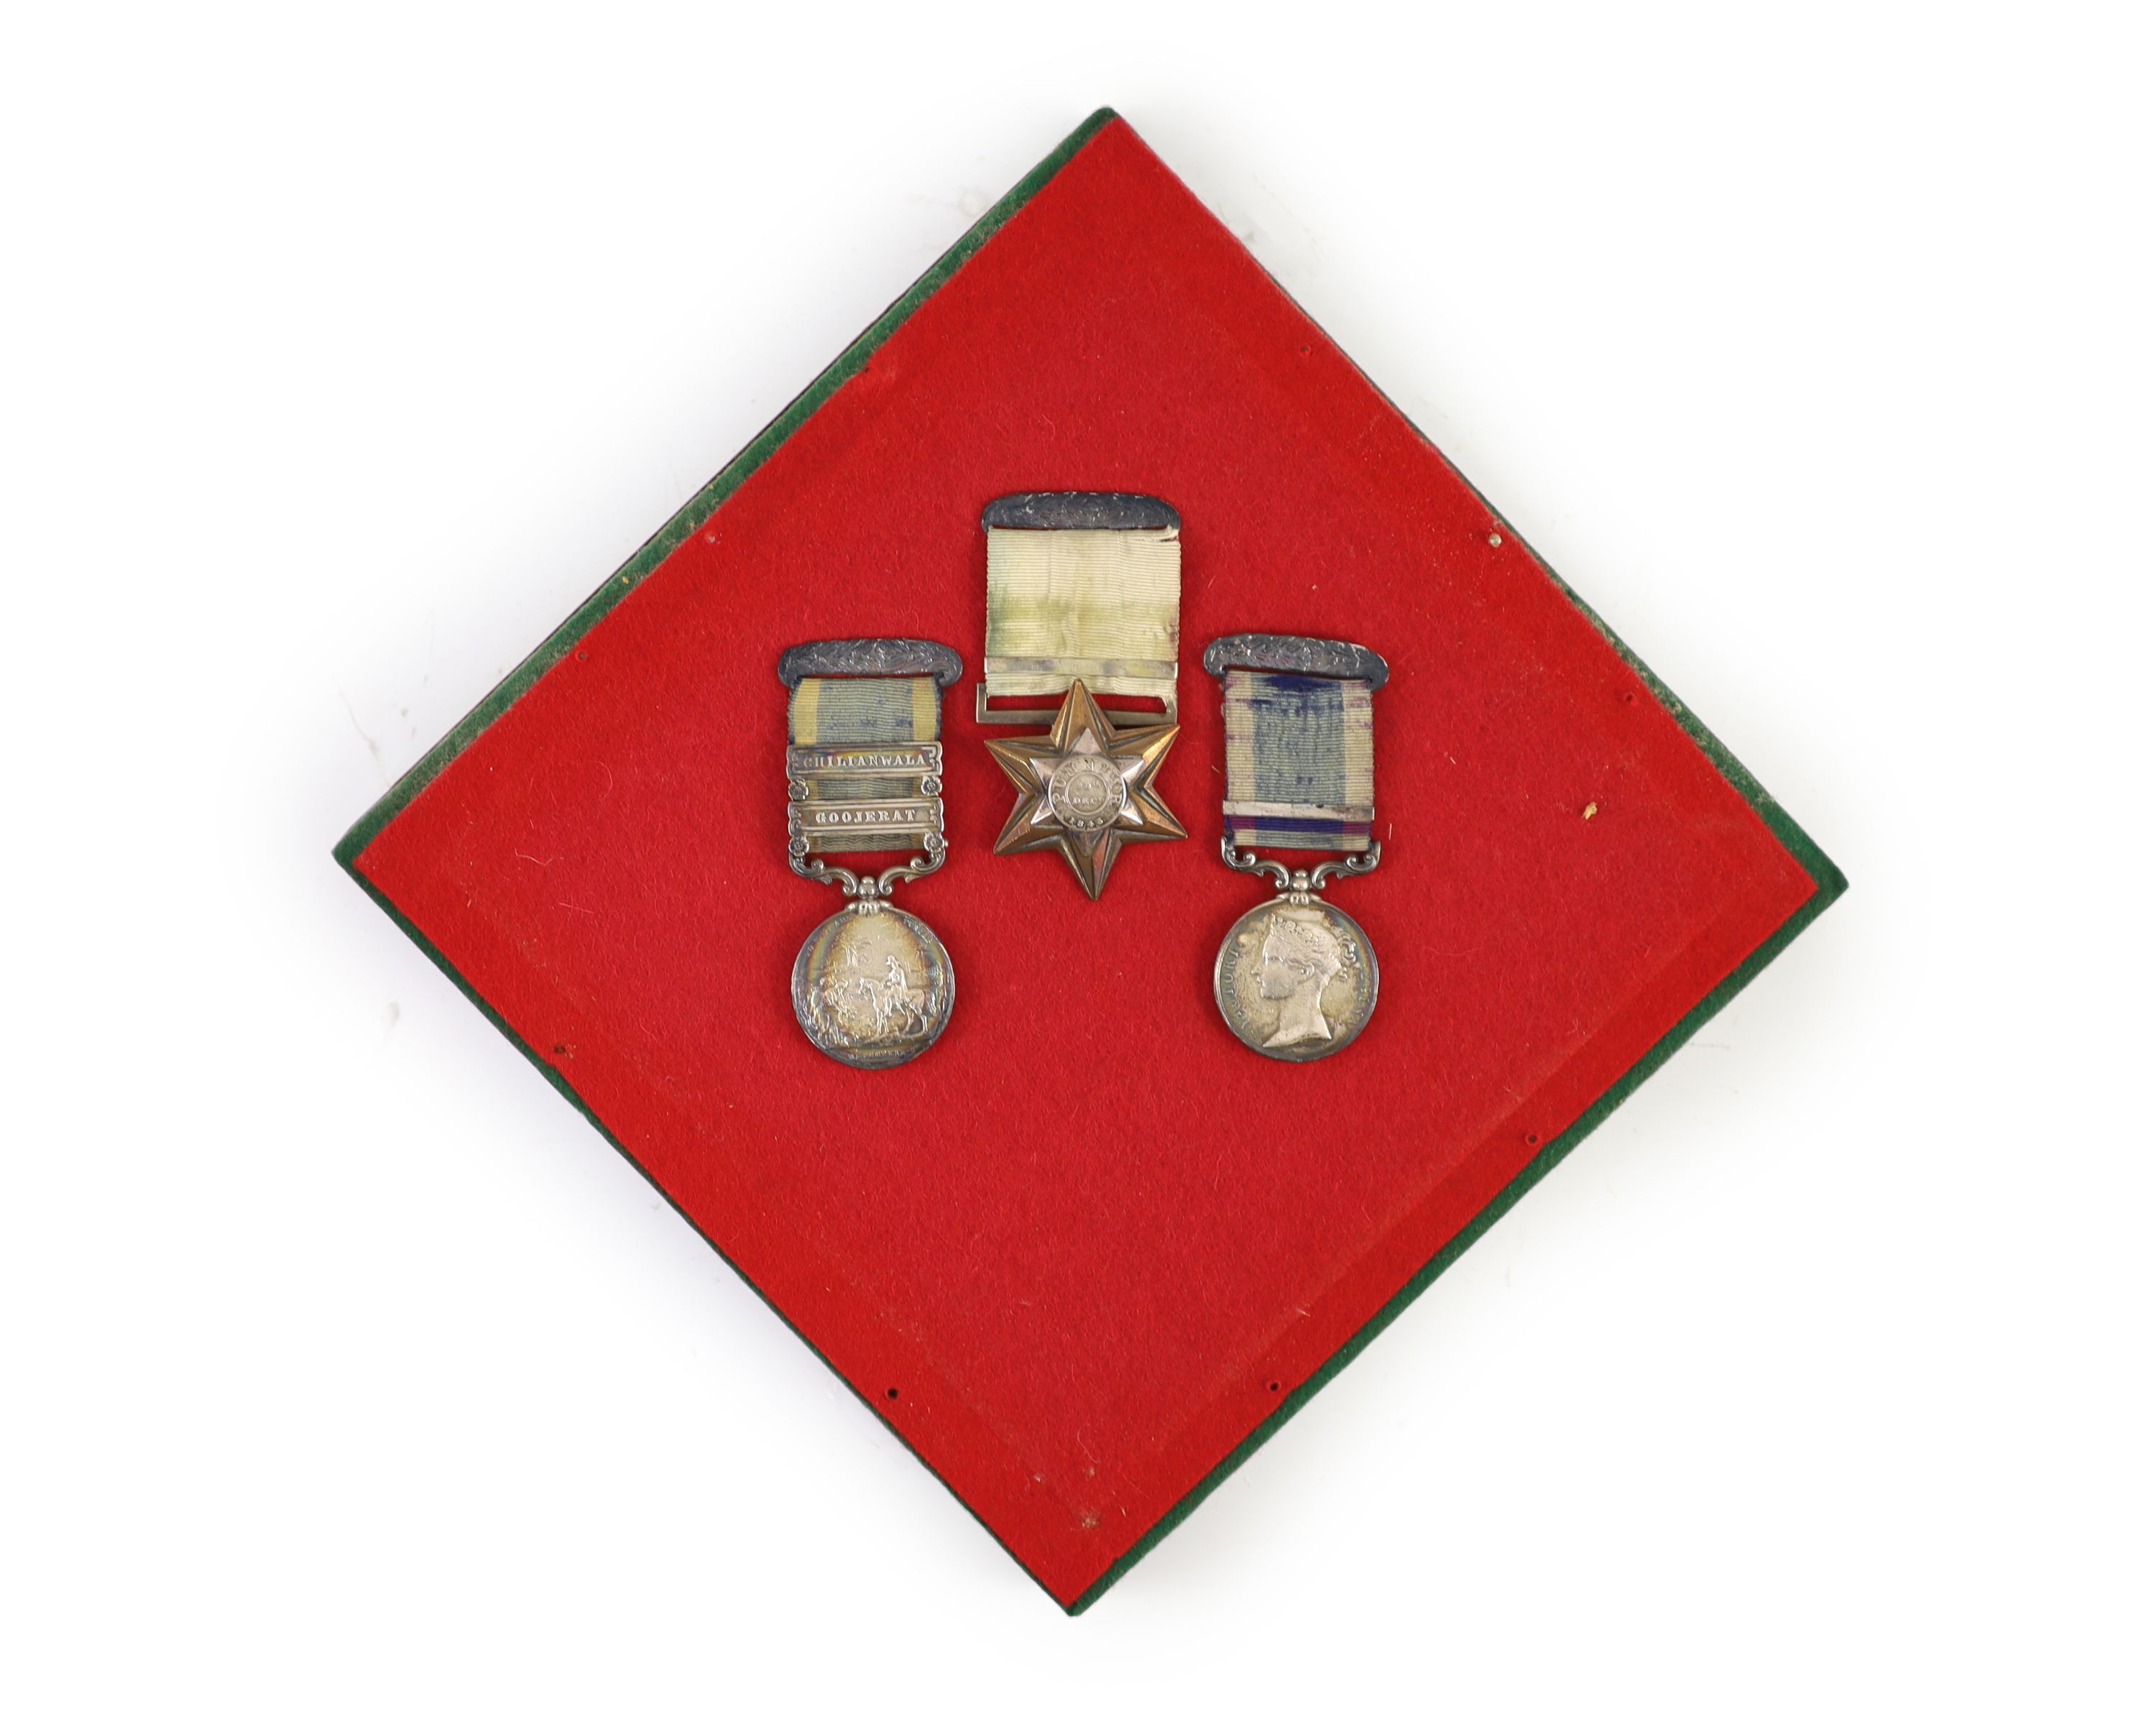 A Victorian Punjab Campaign medal group of three awarded to Corporal John Collett, Queen's Royal Lancers